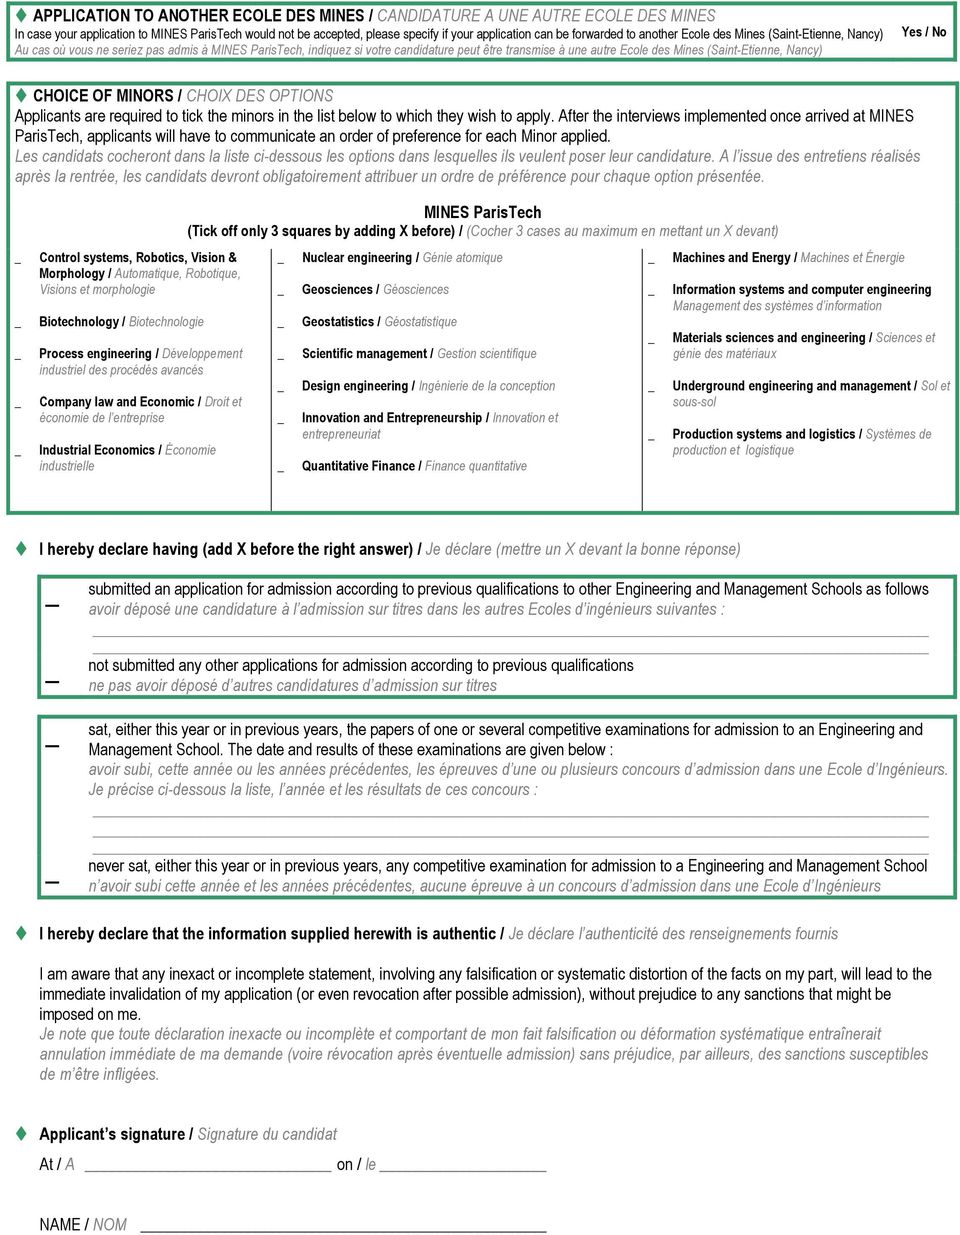 (Saint-Etienne, Nancy) Yes / No t CHOICE OF MINORS / CHOIX DES OPTIONS Applicants are required to tick the minors in the list below to which they wish to apply.